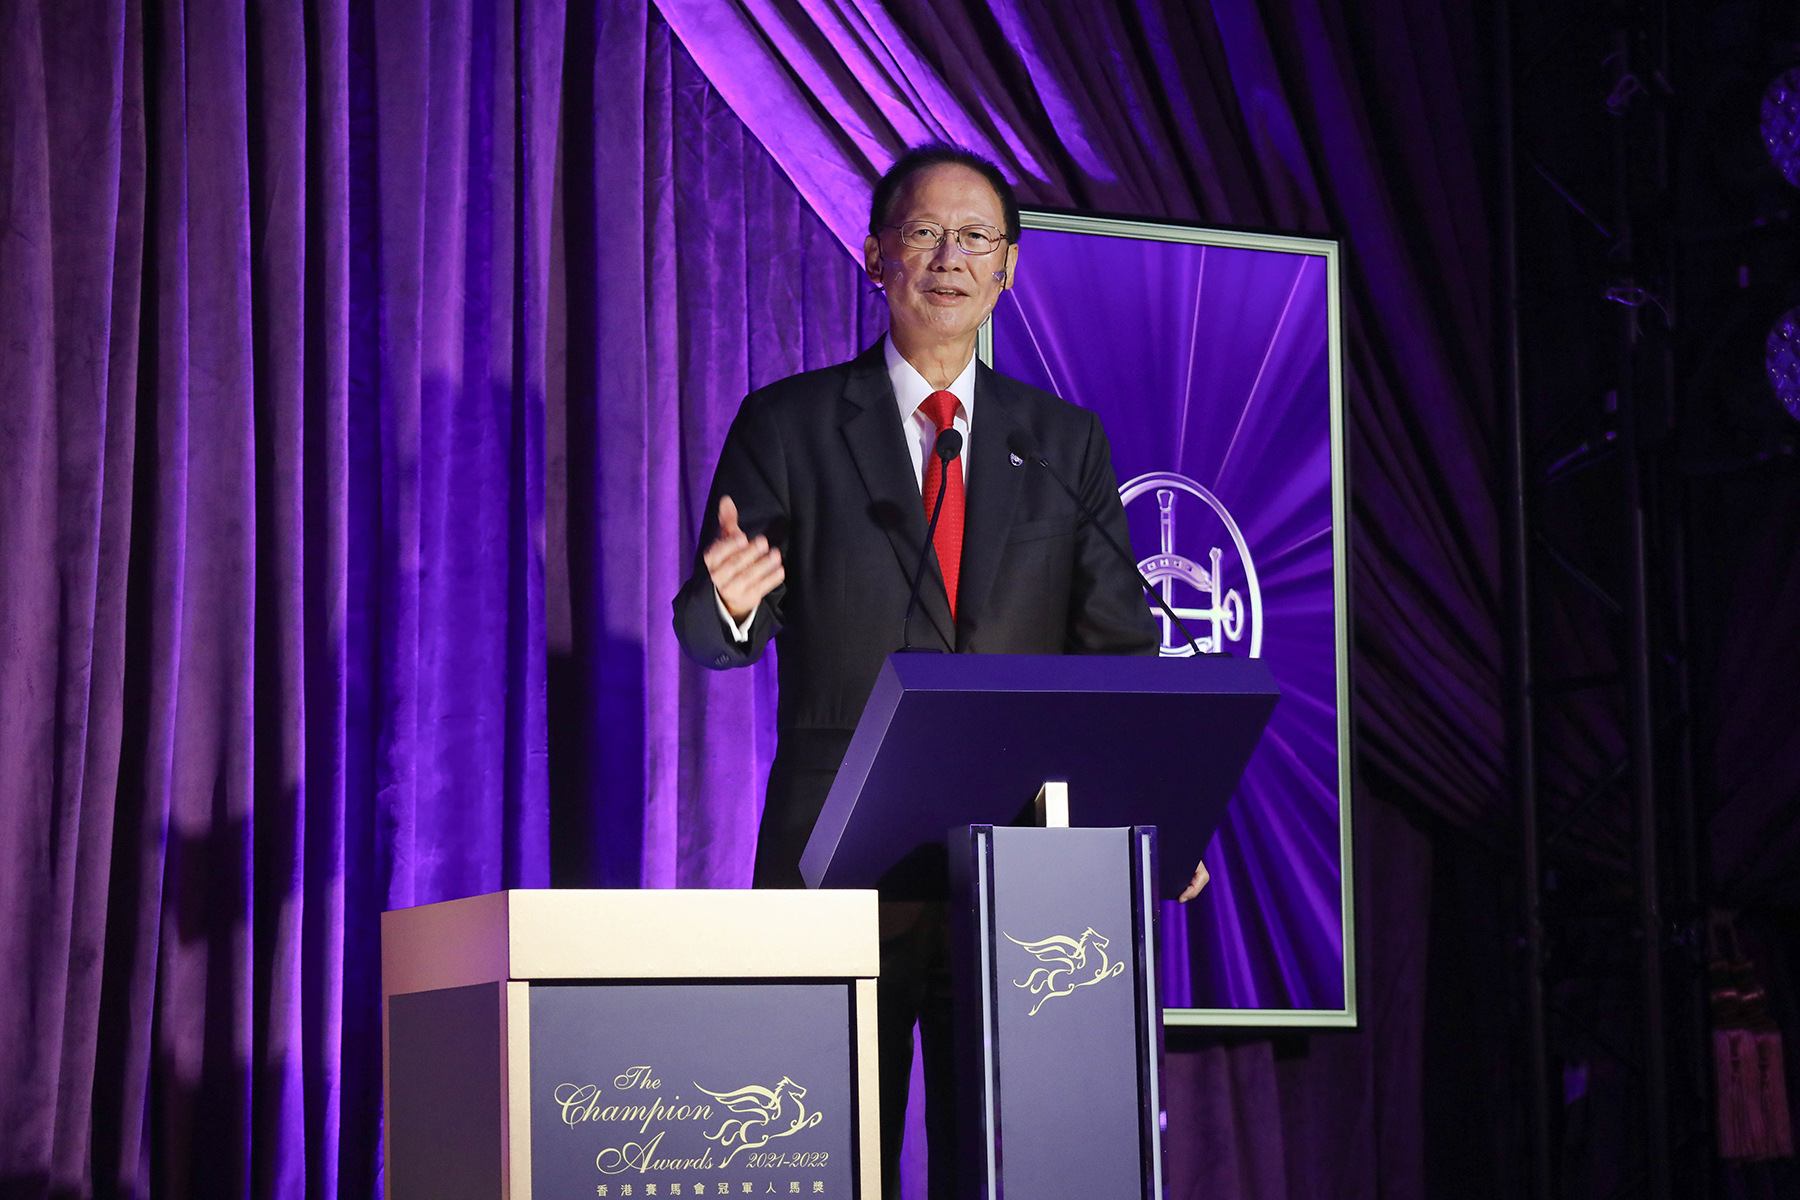 Mr Philip Chen, Chairman of The Hong Kong Jockey Club, delivers a welcome speech at the 2021/22 Champion Awards presentation ceremony held at Happy Valley Clubhouse tonight.